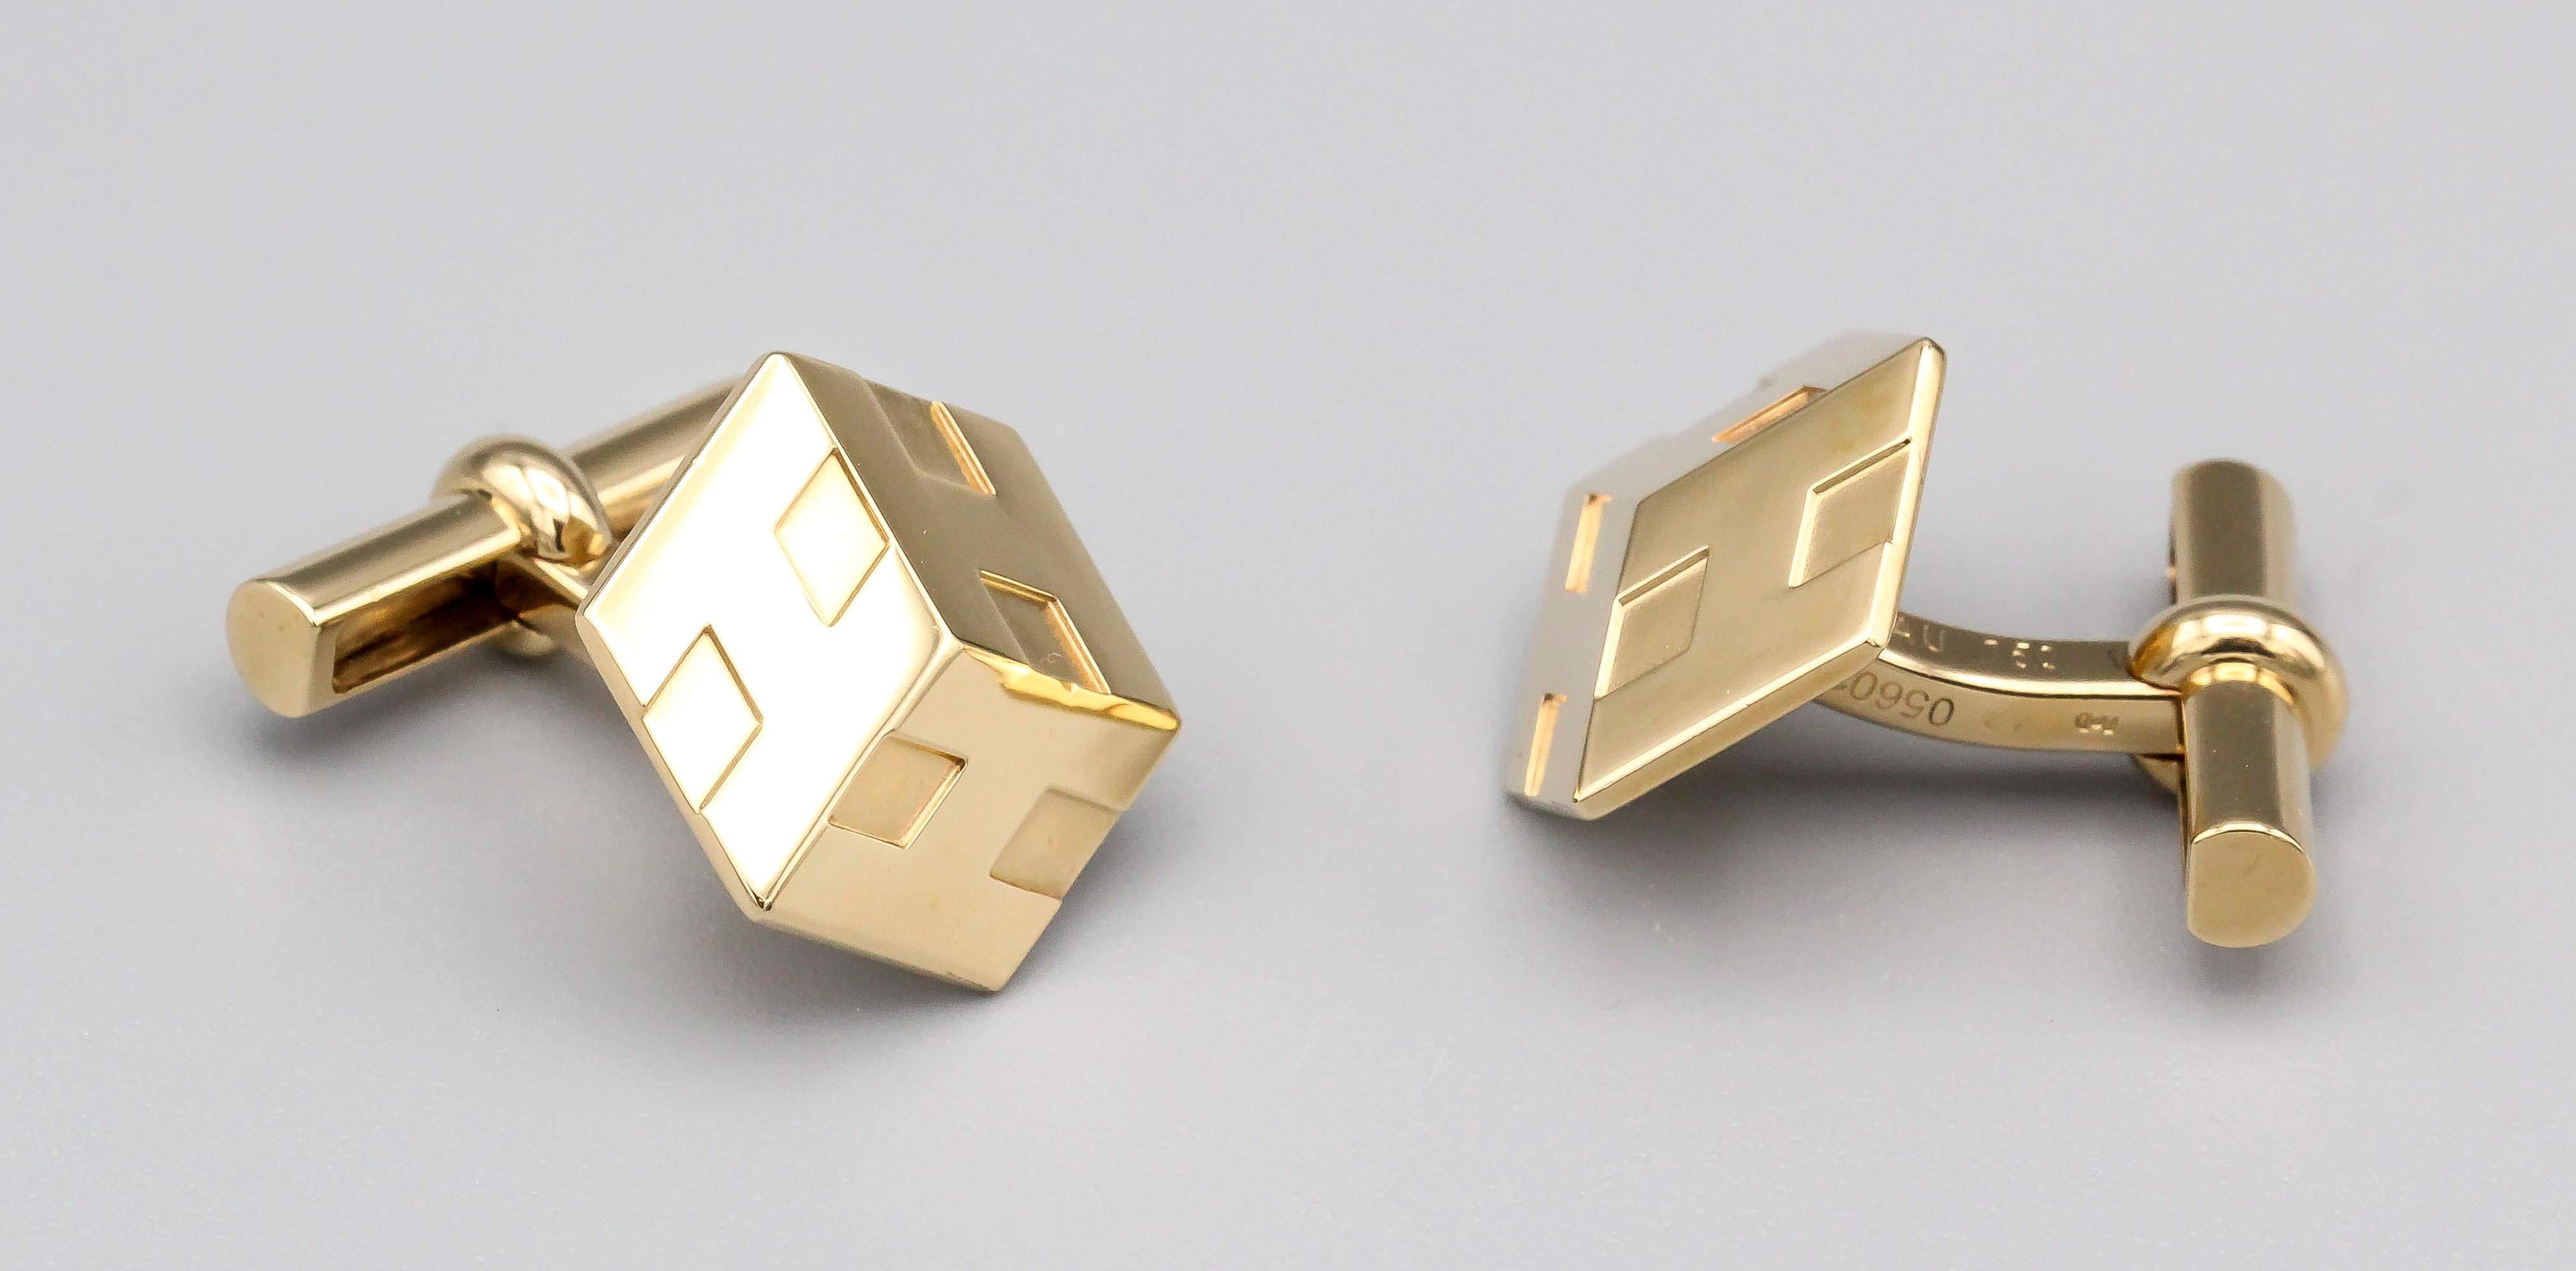 Fine pair of 18K yellow gold cufflinks by Hermes.  The resemble a 3d cube with the Hermes 